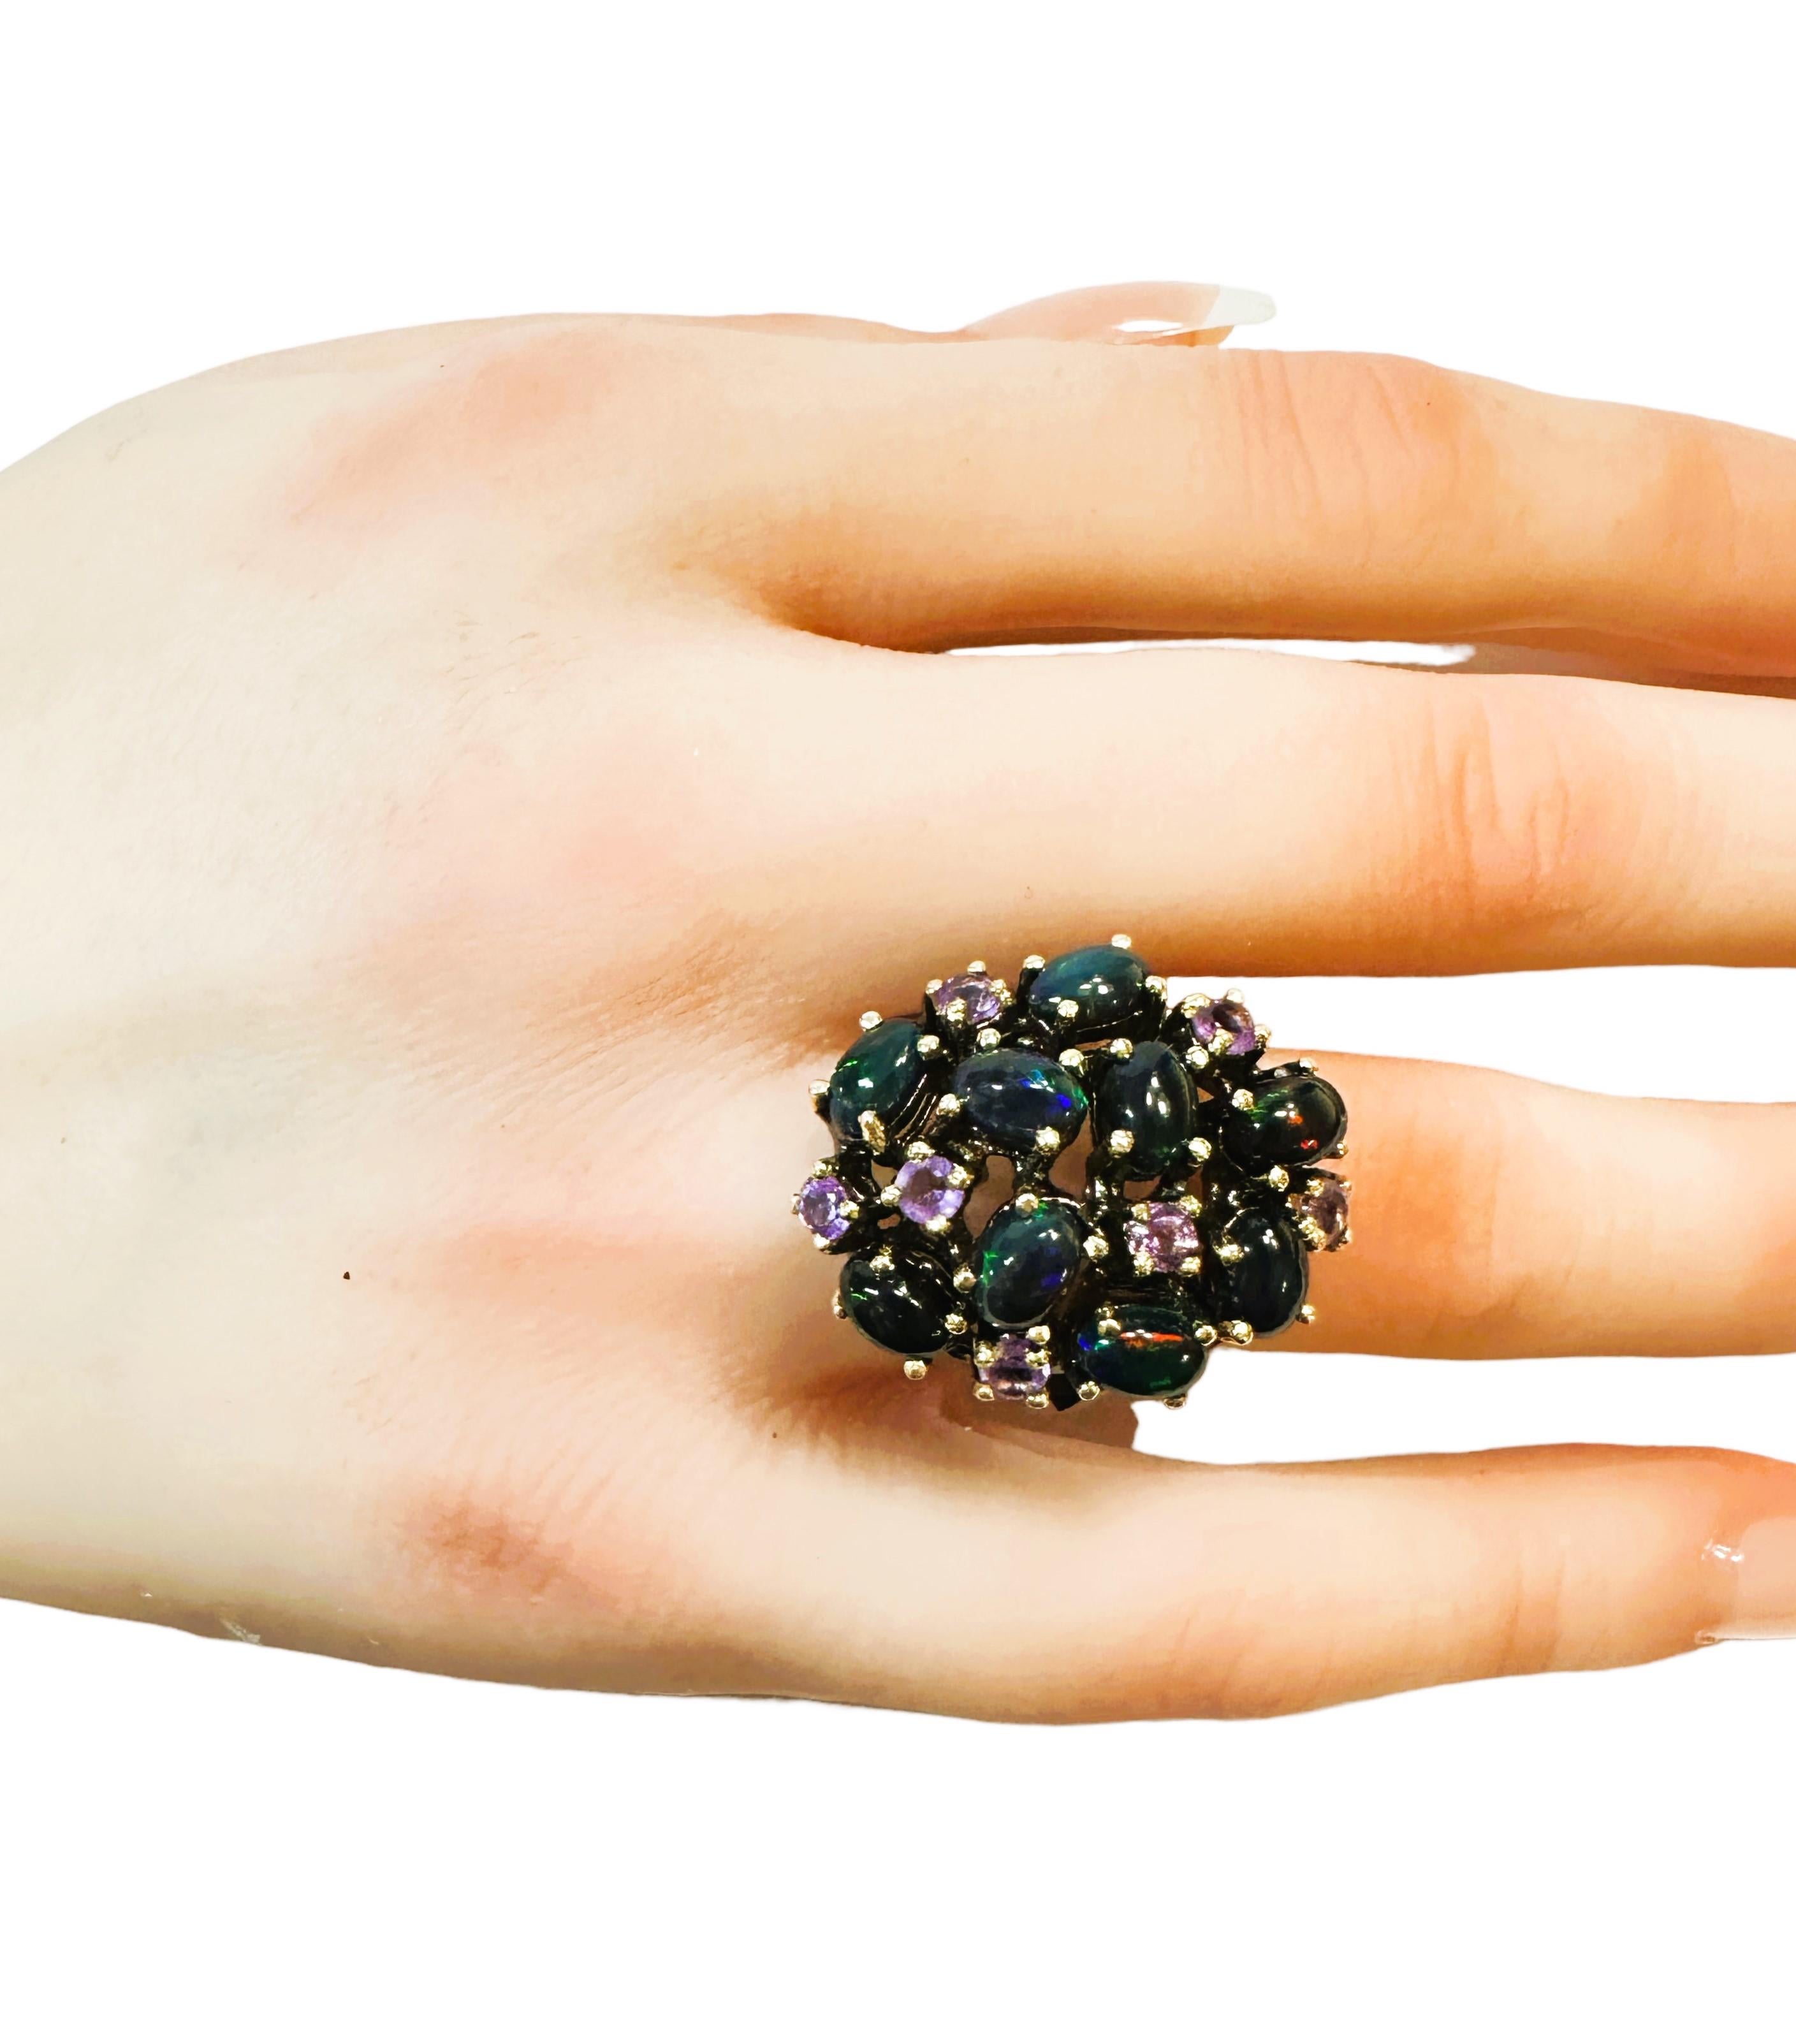 New Handmade Ethiopian Black Opal & Amethyst Ring in Oxi-black Sterling Silver For Sale 2